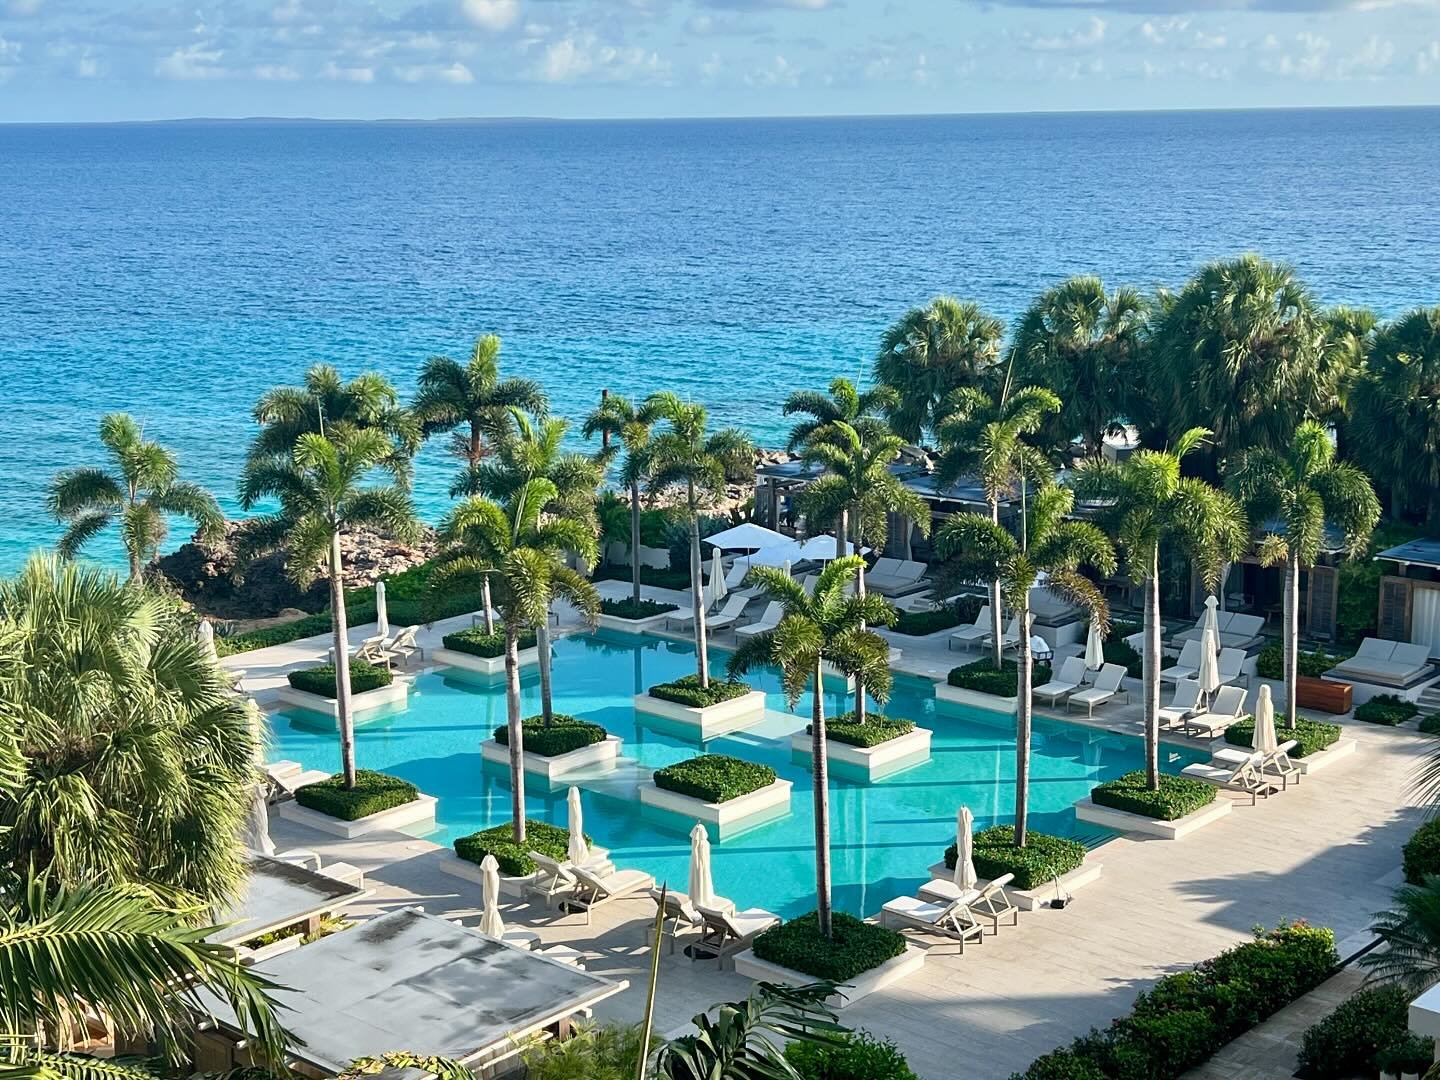 First impressions of the Four Seasons resort, Anguilla&hellip;WOW!  #CadenceTravel #CadenceCommunity #CadenceTrailblazer #fourseasonsanguilla